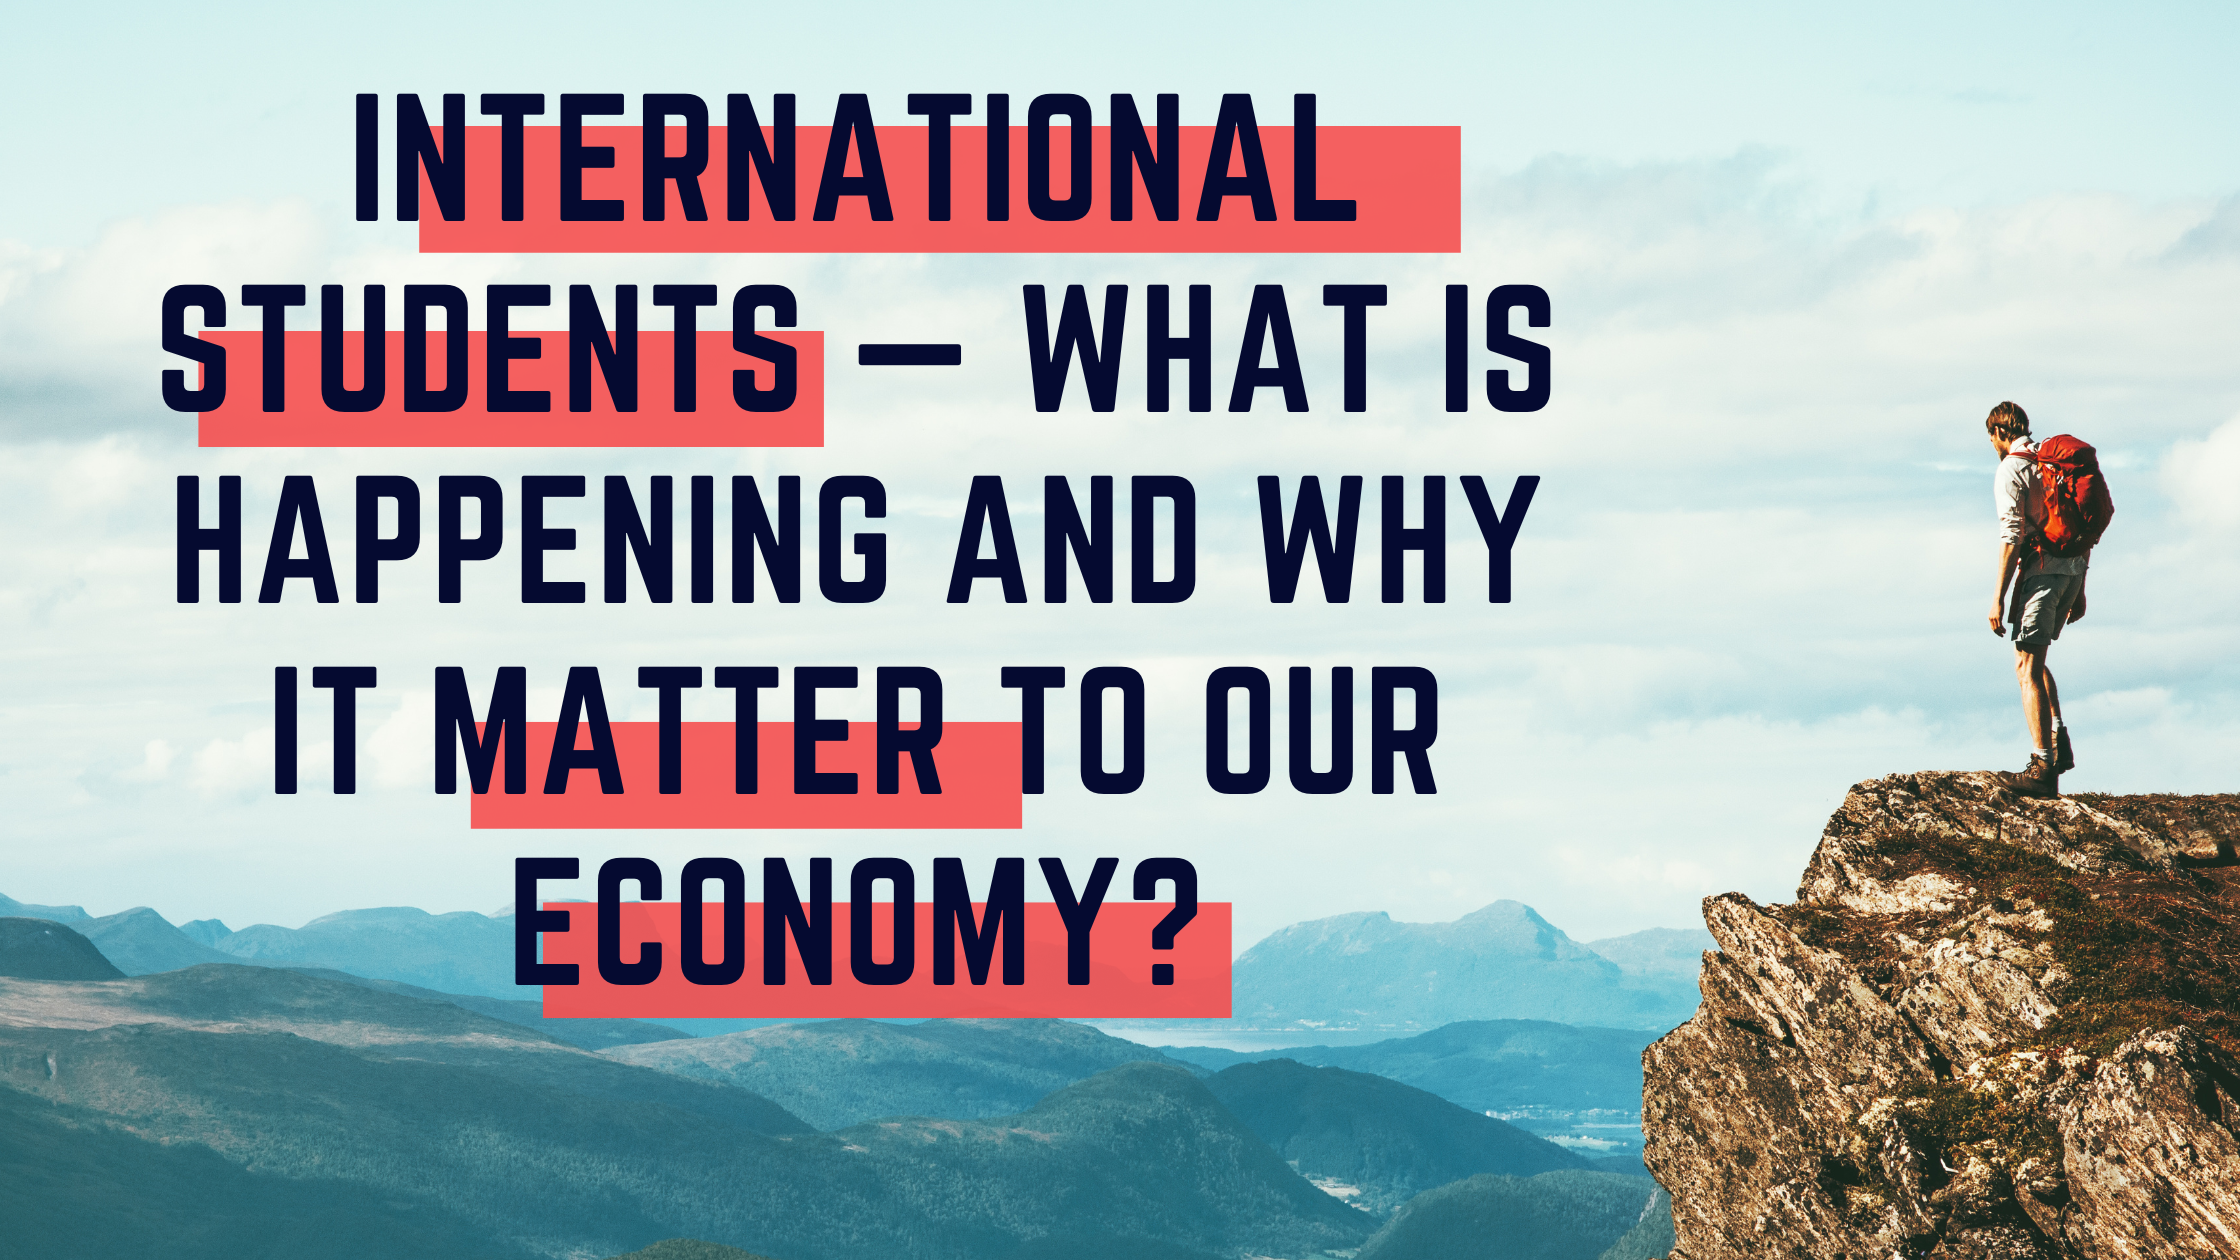 International students — what is happening and why it matter to our economy